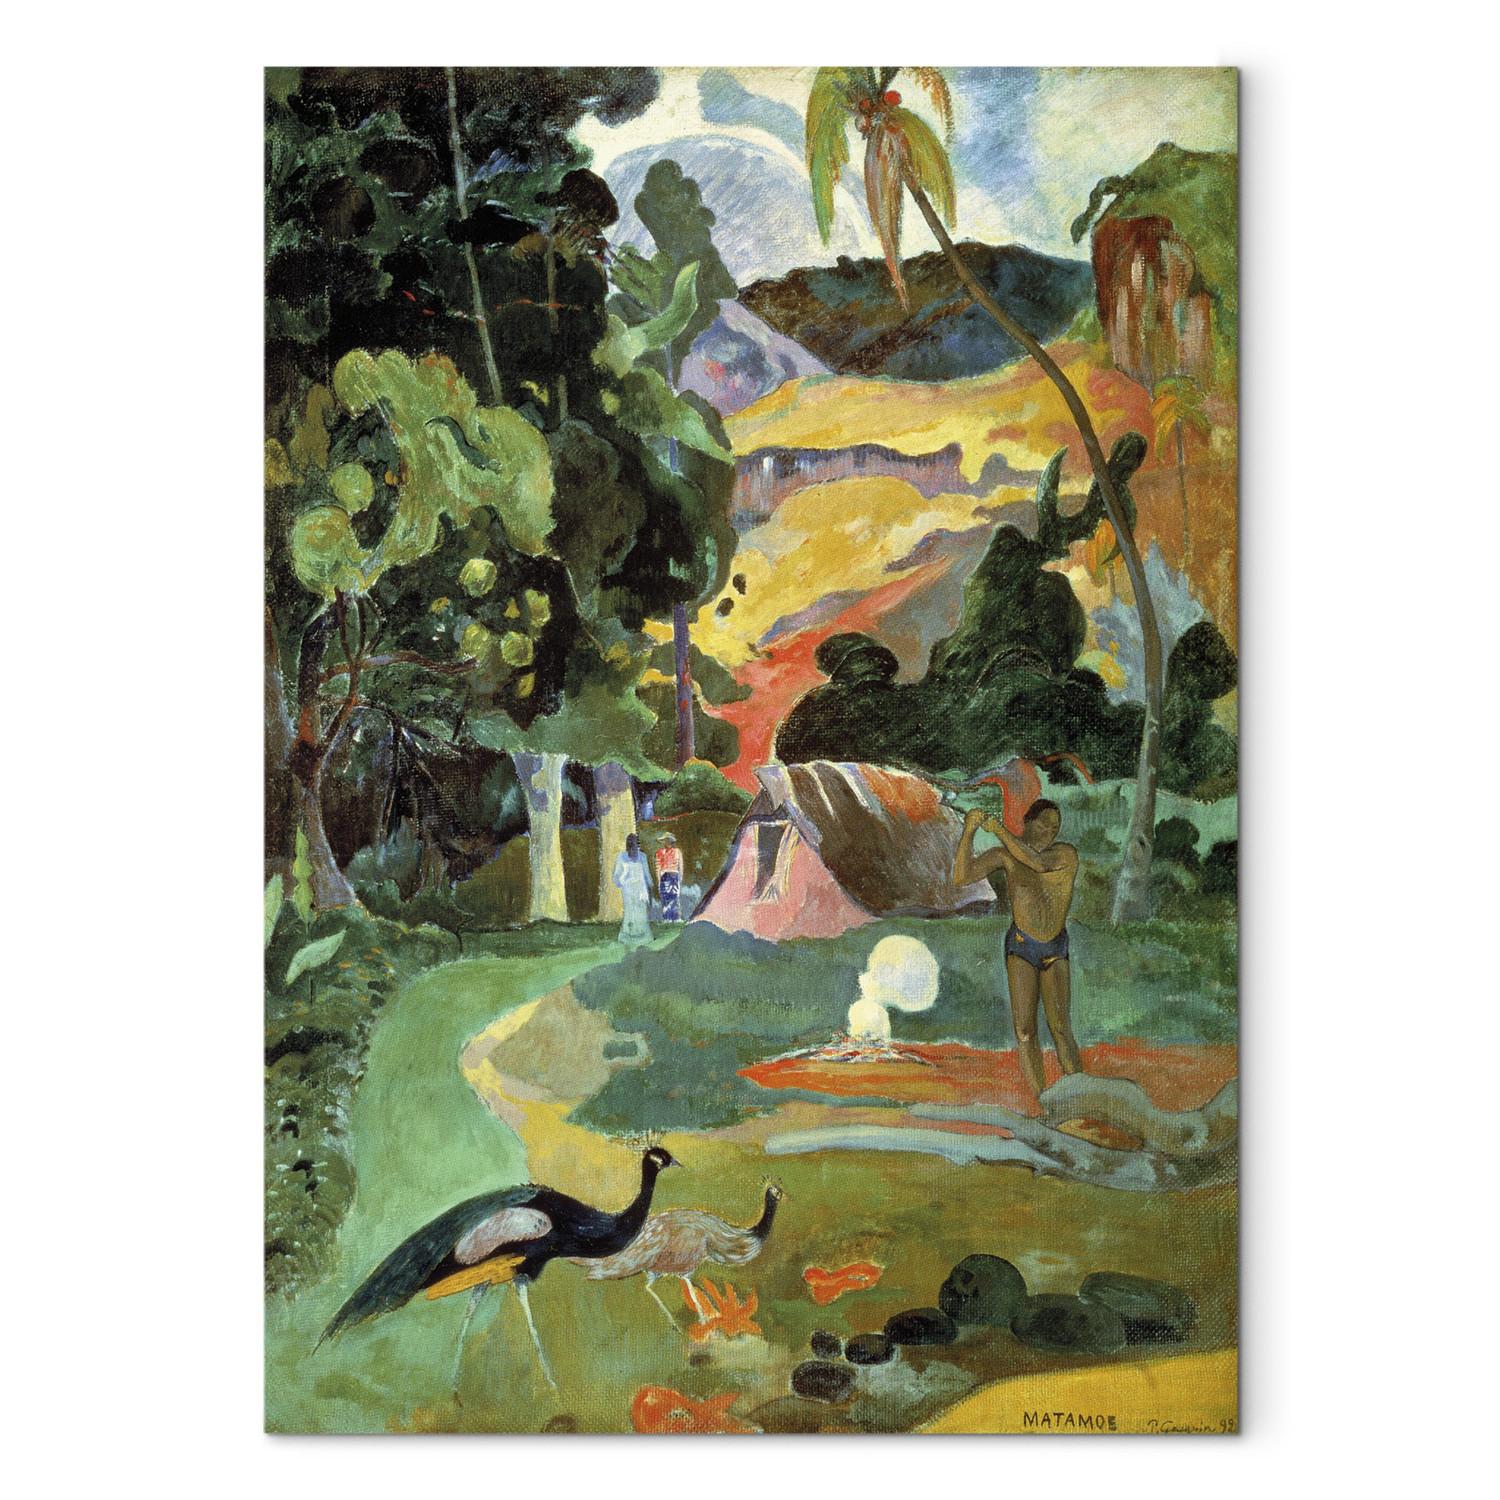 Canvas Landscape with Peacocks